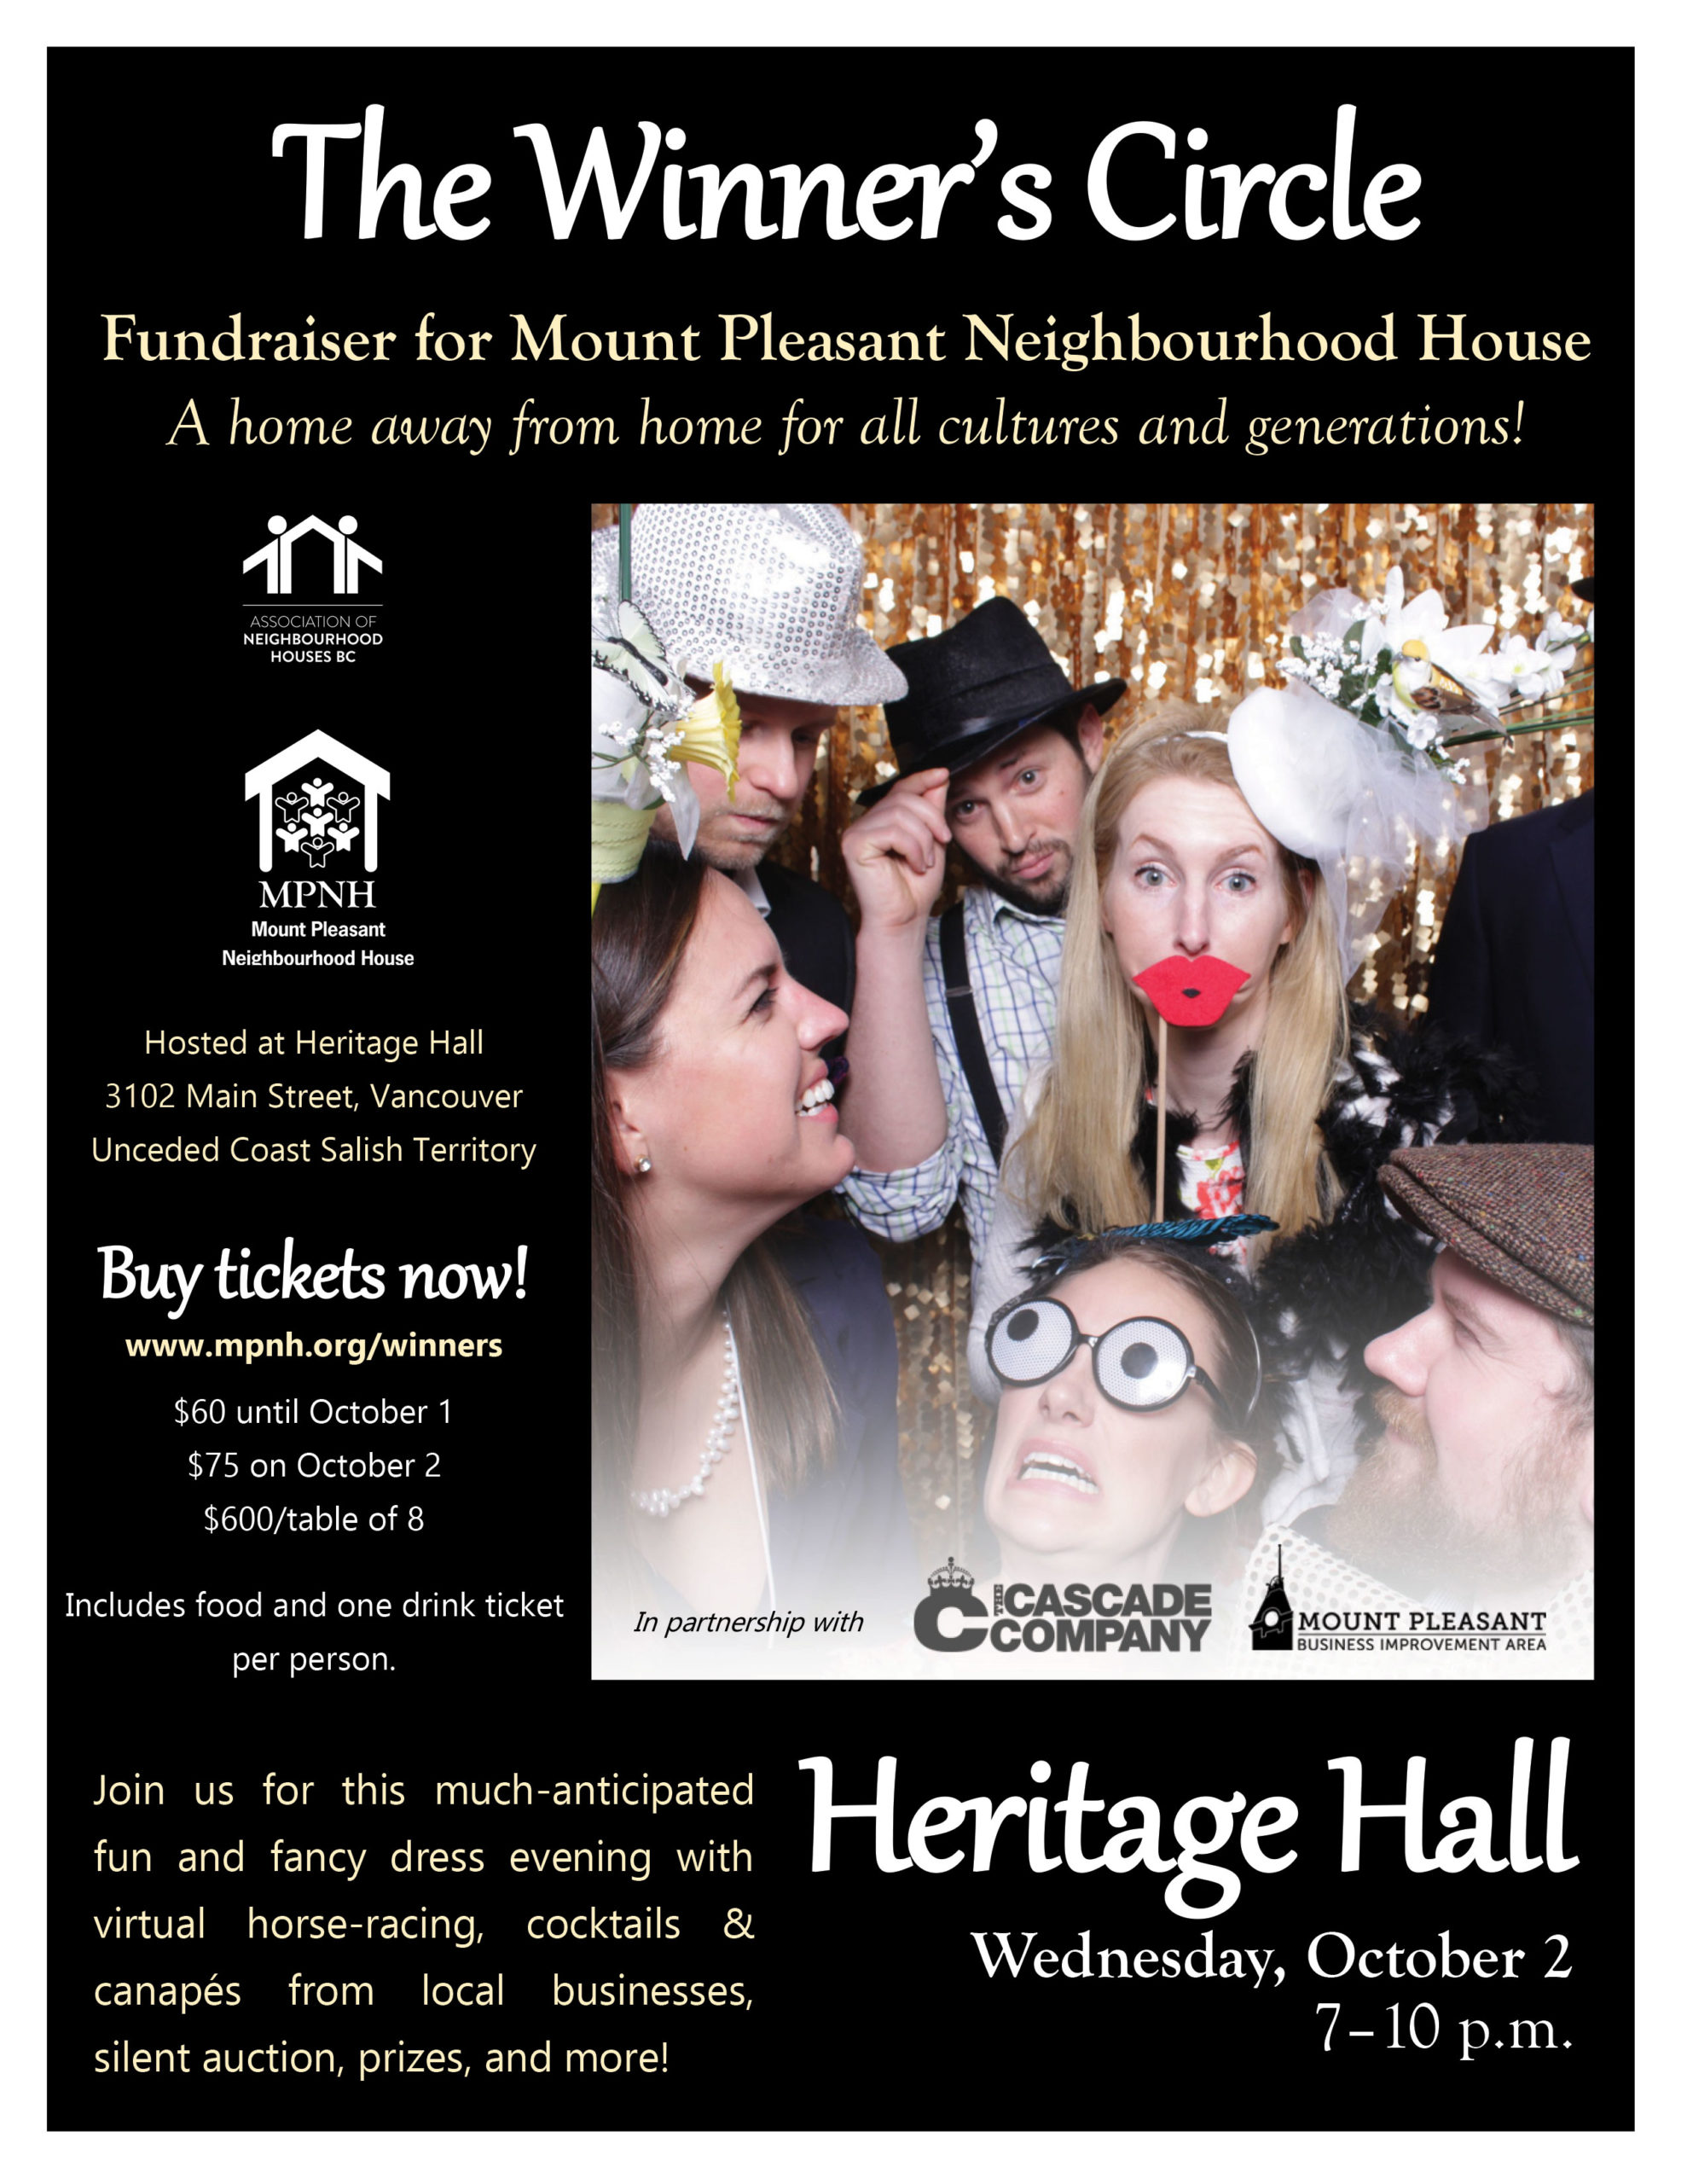 An image of the poster with event details, featuring a photo of a group of friends posing in the photo booth in front of a gold sequin backdrop